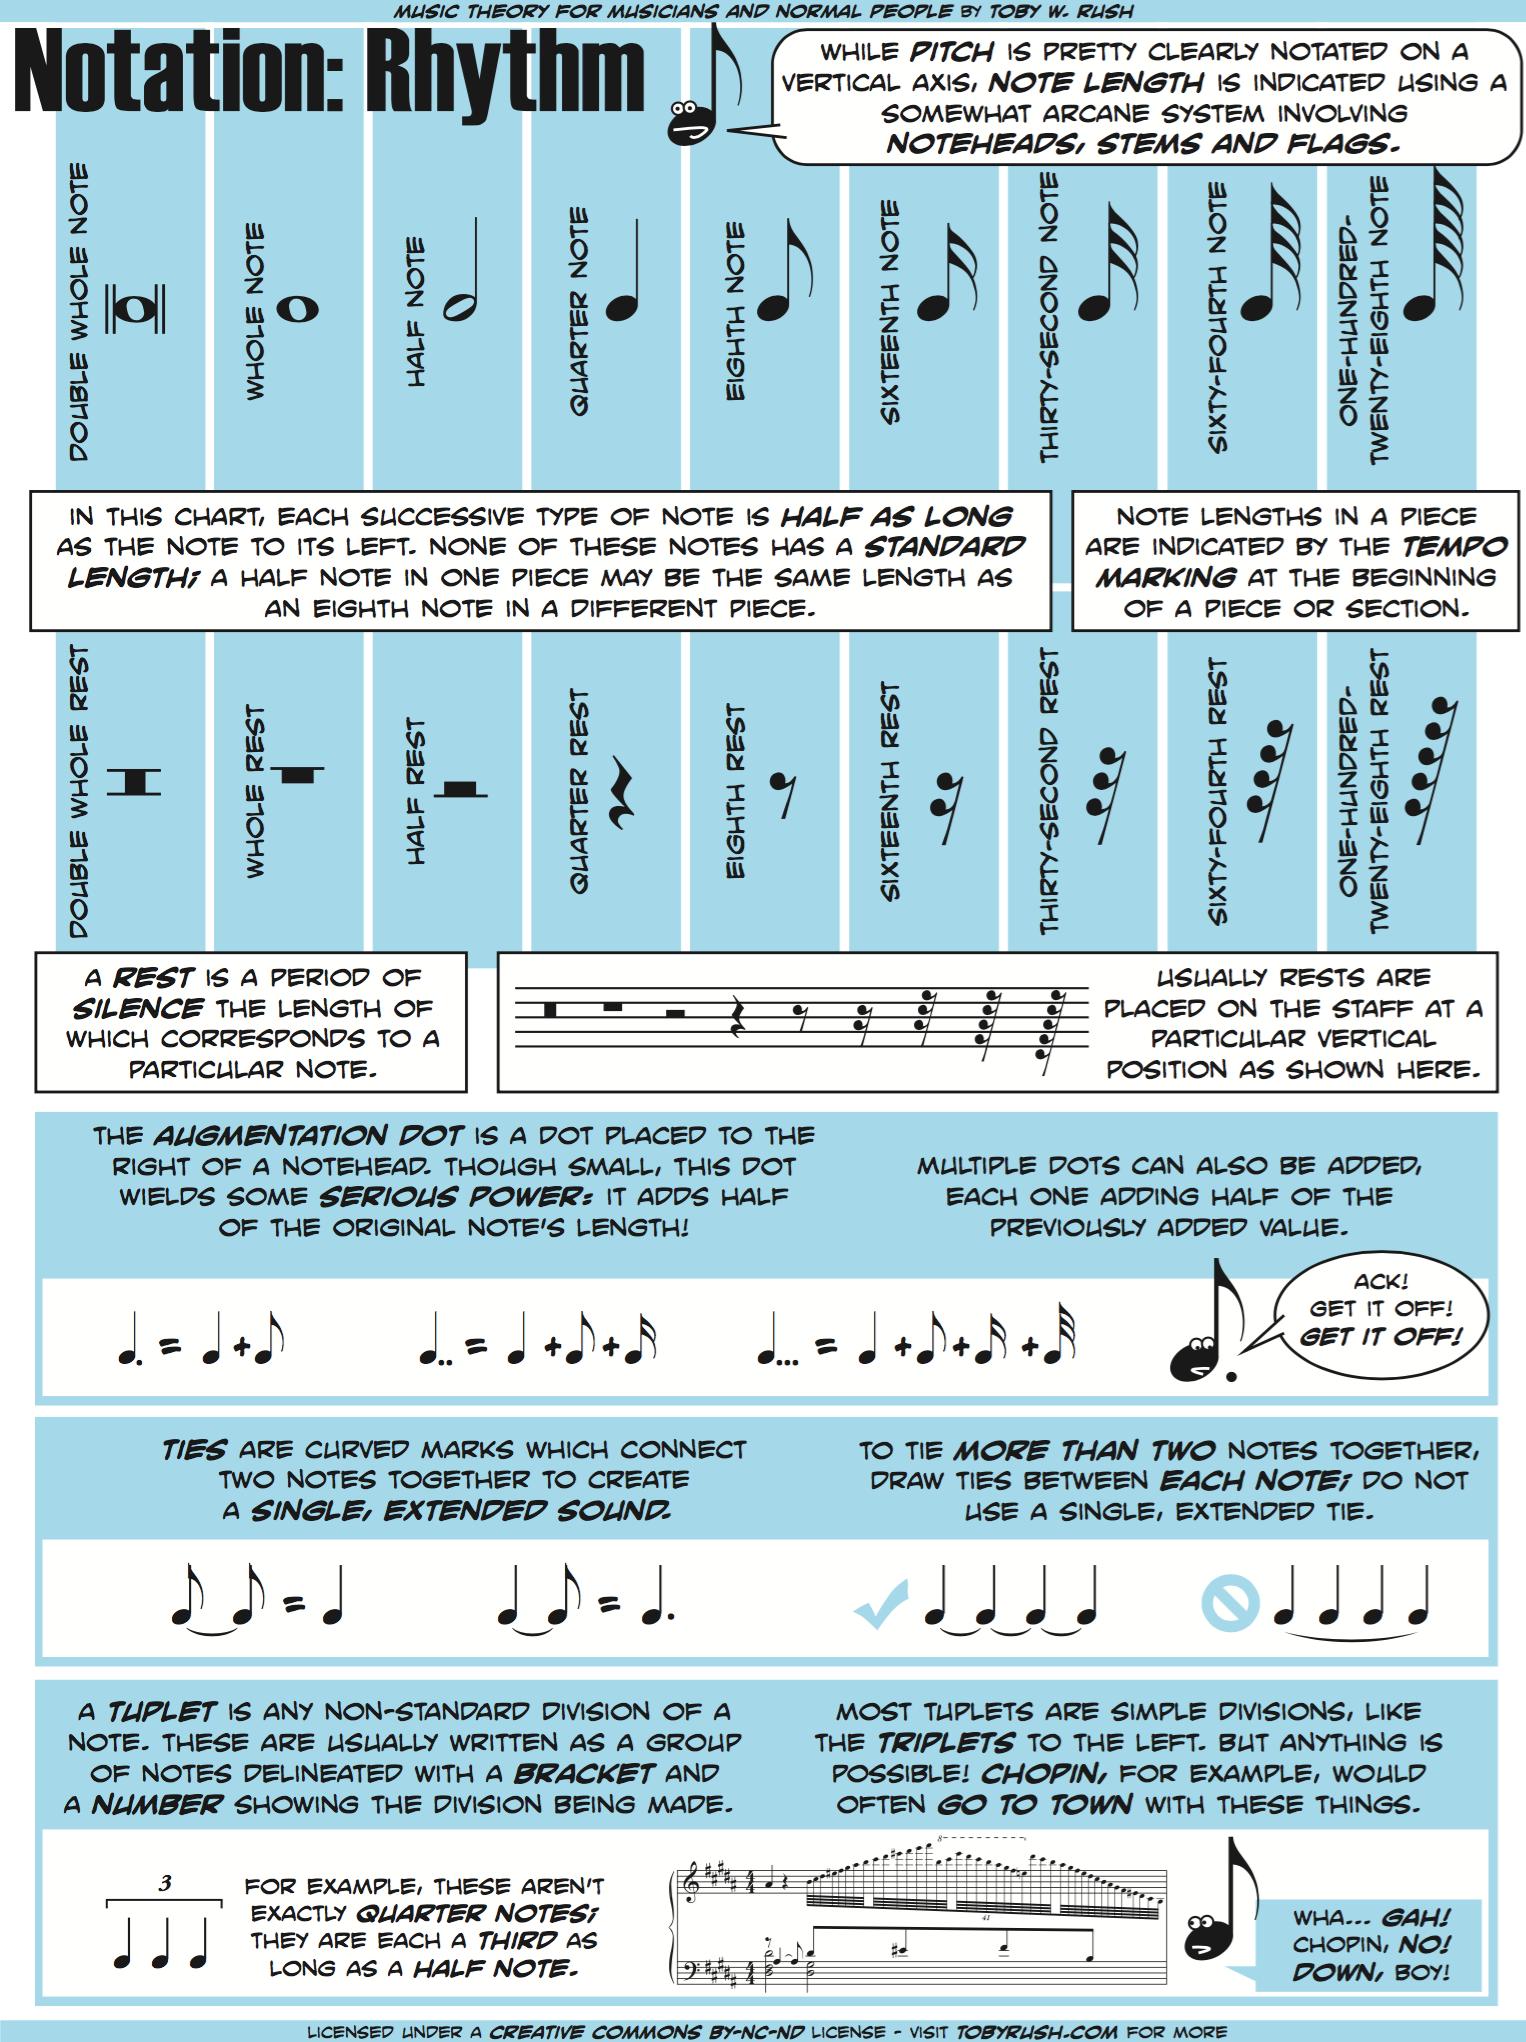 Music theory graphics by Toby W. Rush